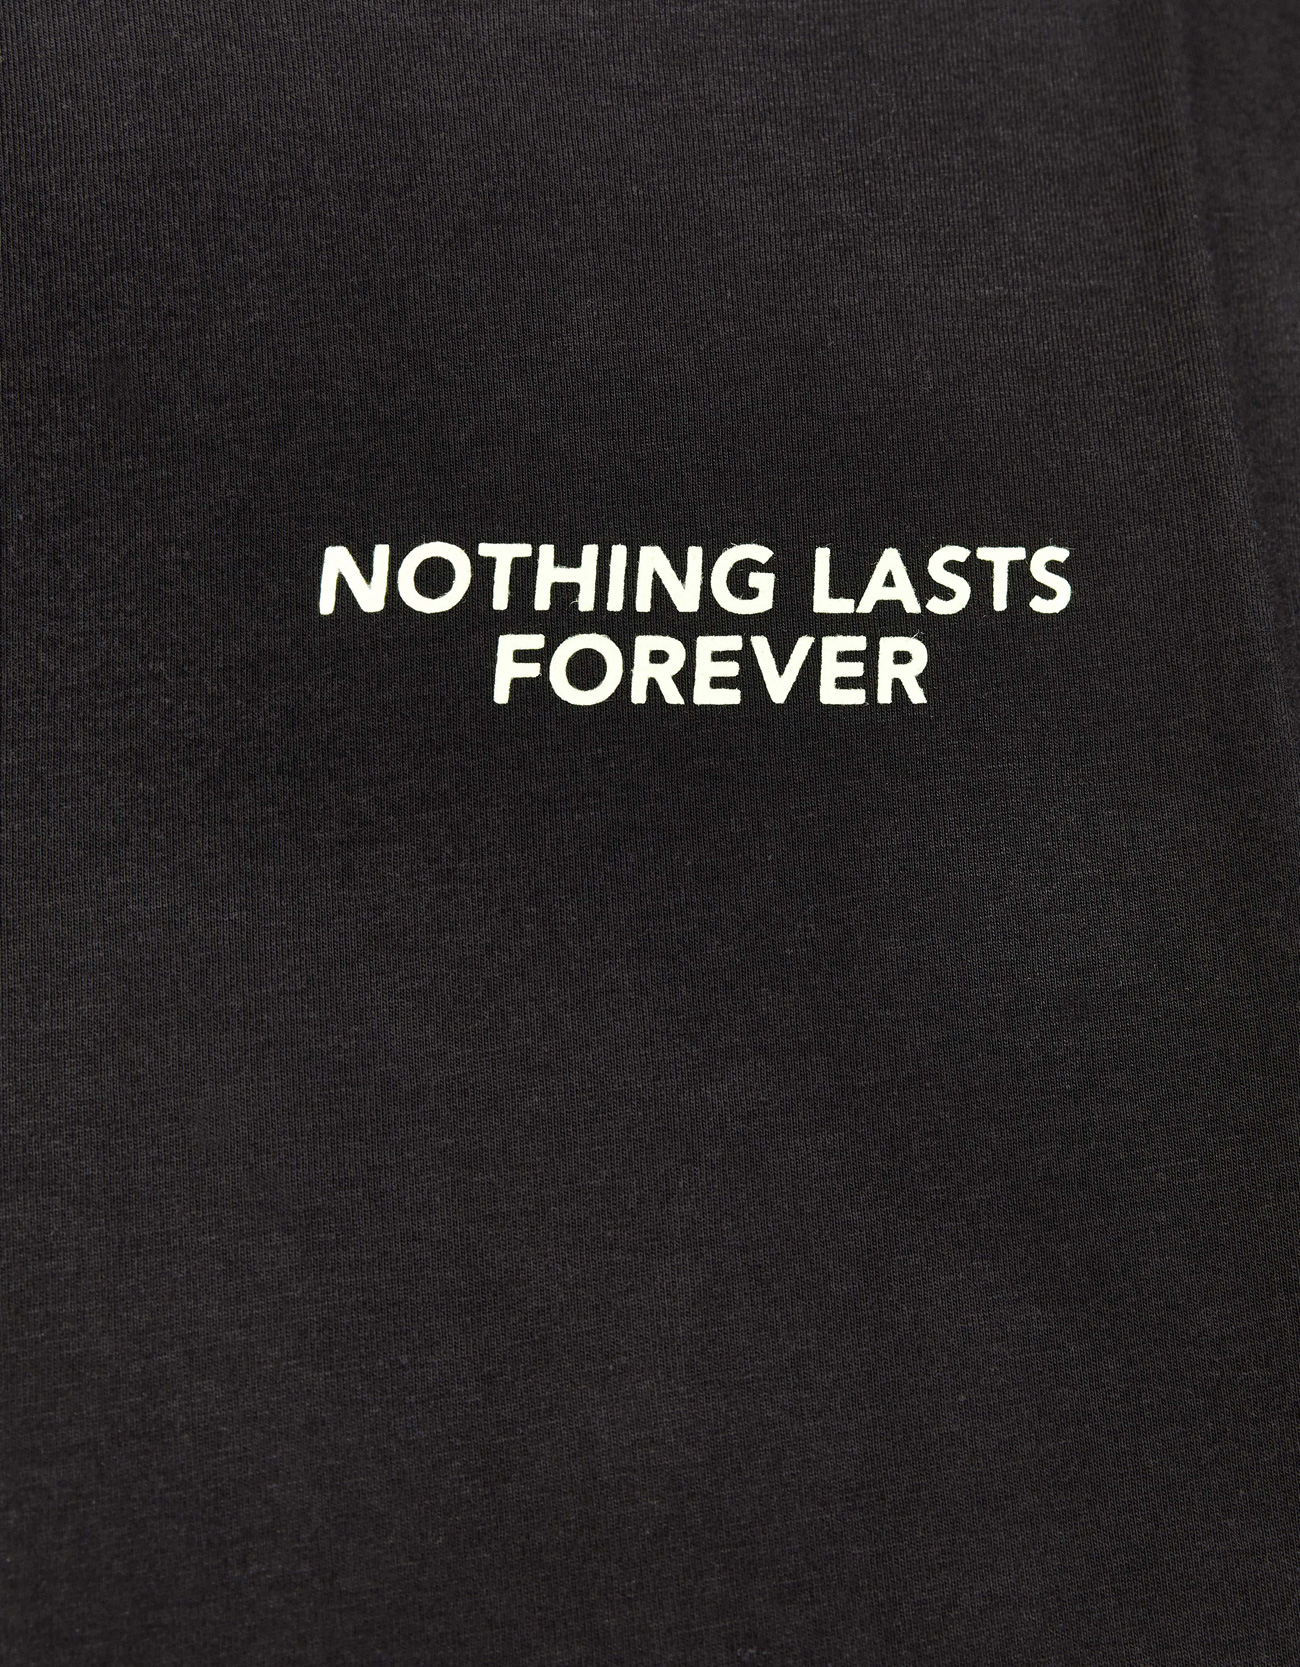 You and i forever перевод. Бренд nothing. Forever nothing lasts Forever. Forever nothing lasts Forever обои. Надпись nothing.